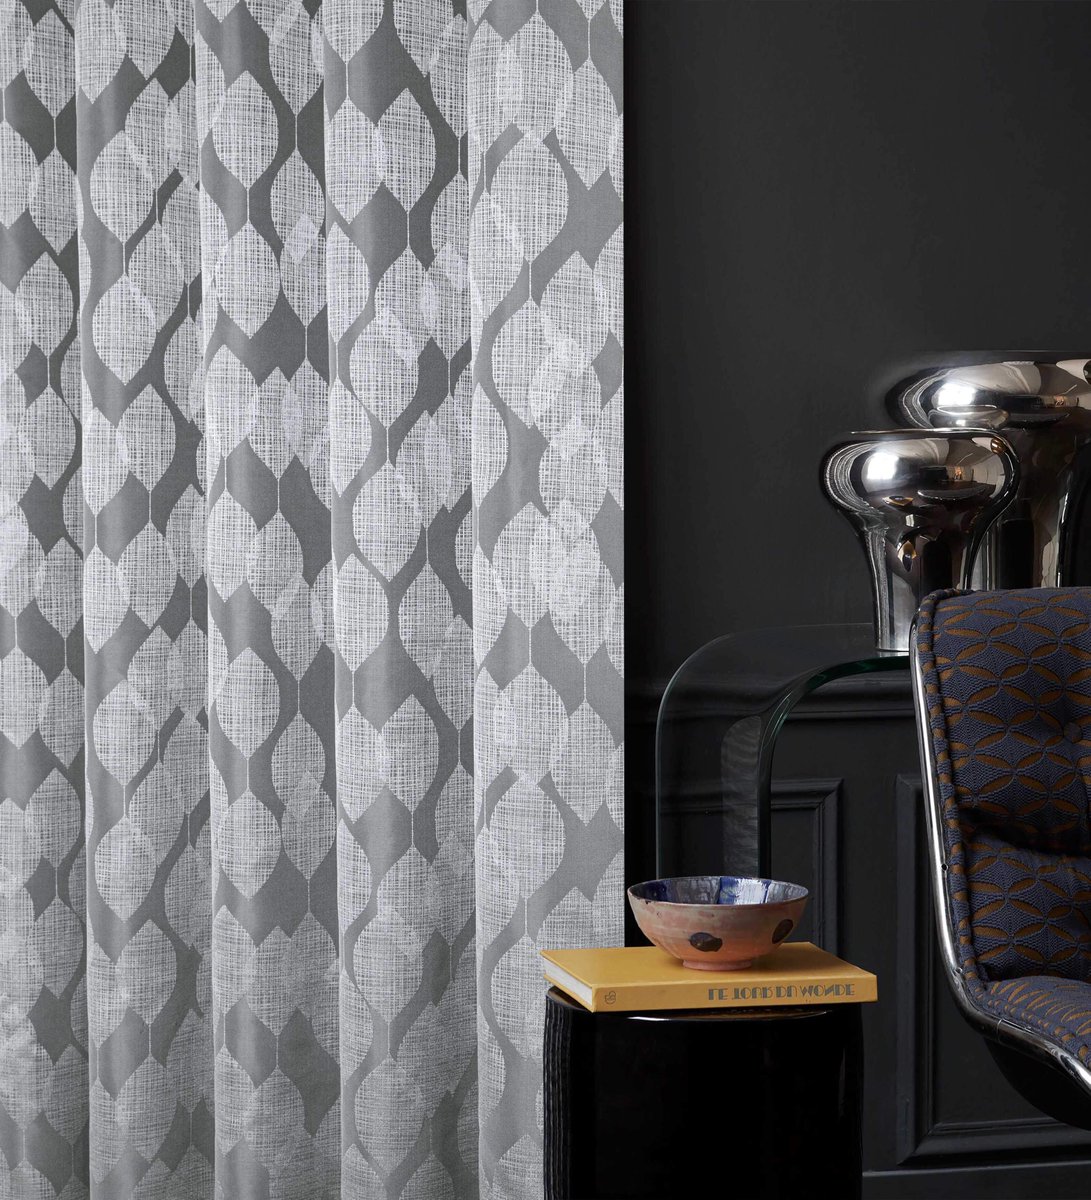 Halo contemporary jacquard curtains in tonal textures completed with a silk and matte finish. ow.ly/BoBa50R3YGA

#eyelets #grey #blue #natural #cream #tonal #textures #silk #matte #finish #themillshopnottingham #homedecor #homestyling #homestyle #homeinspo